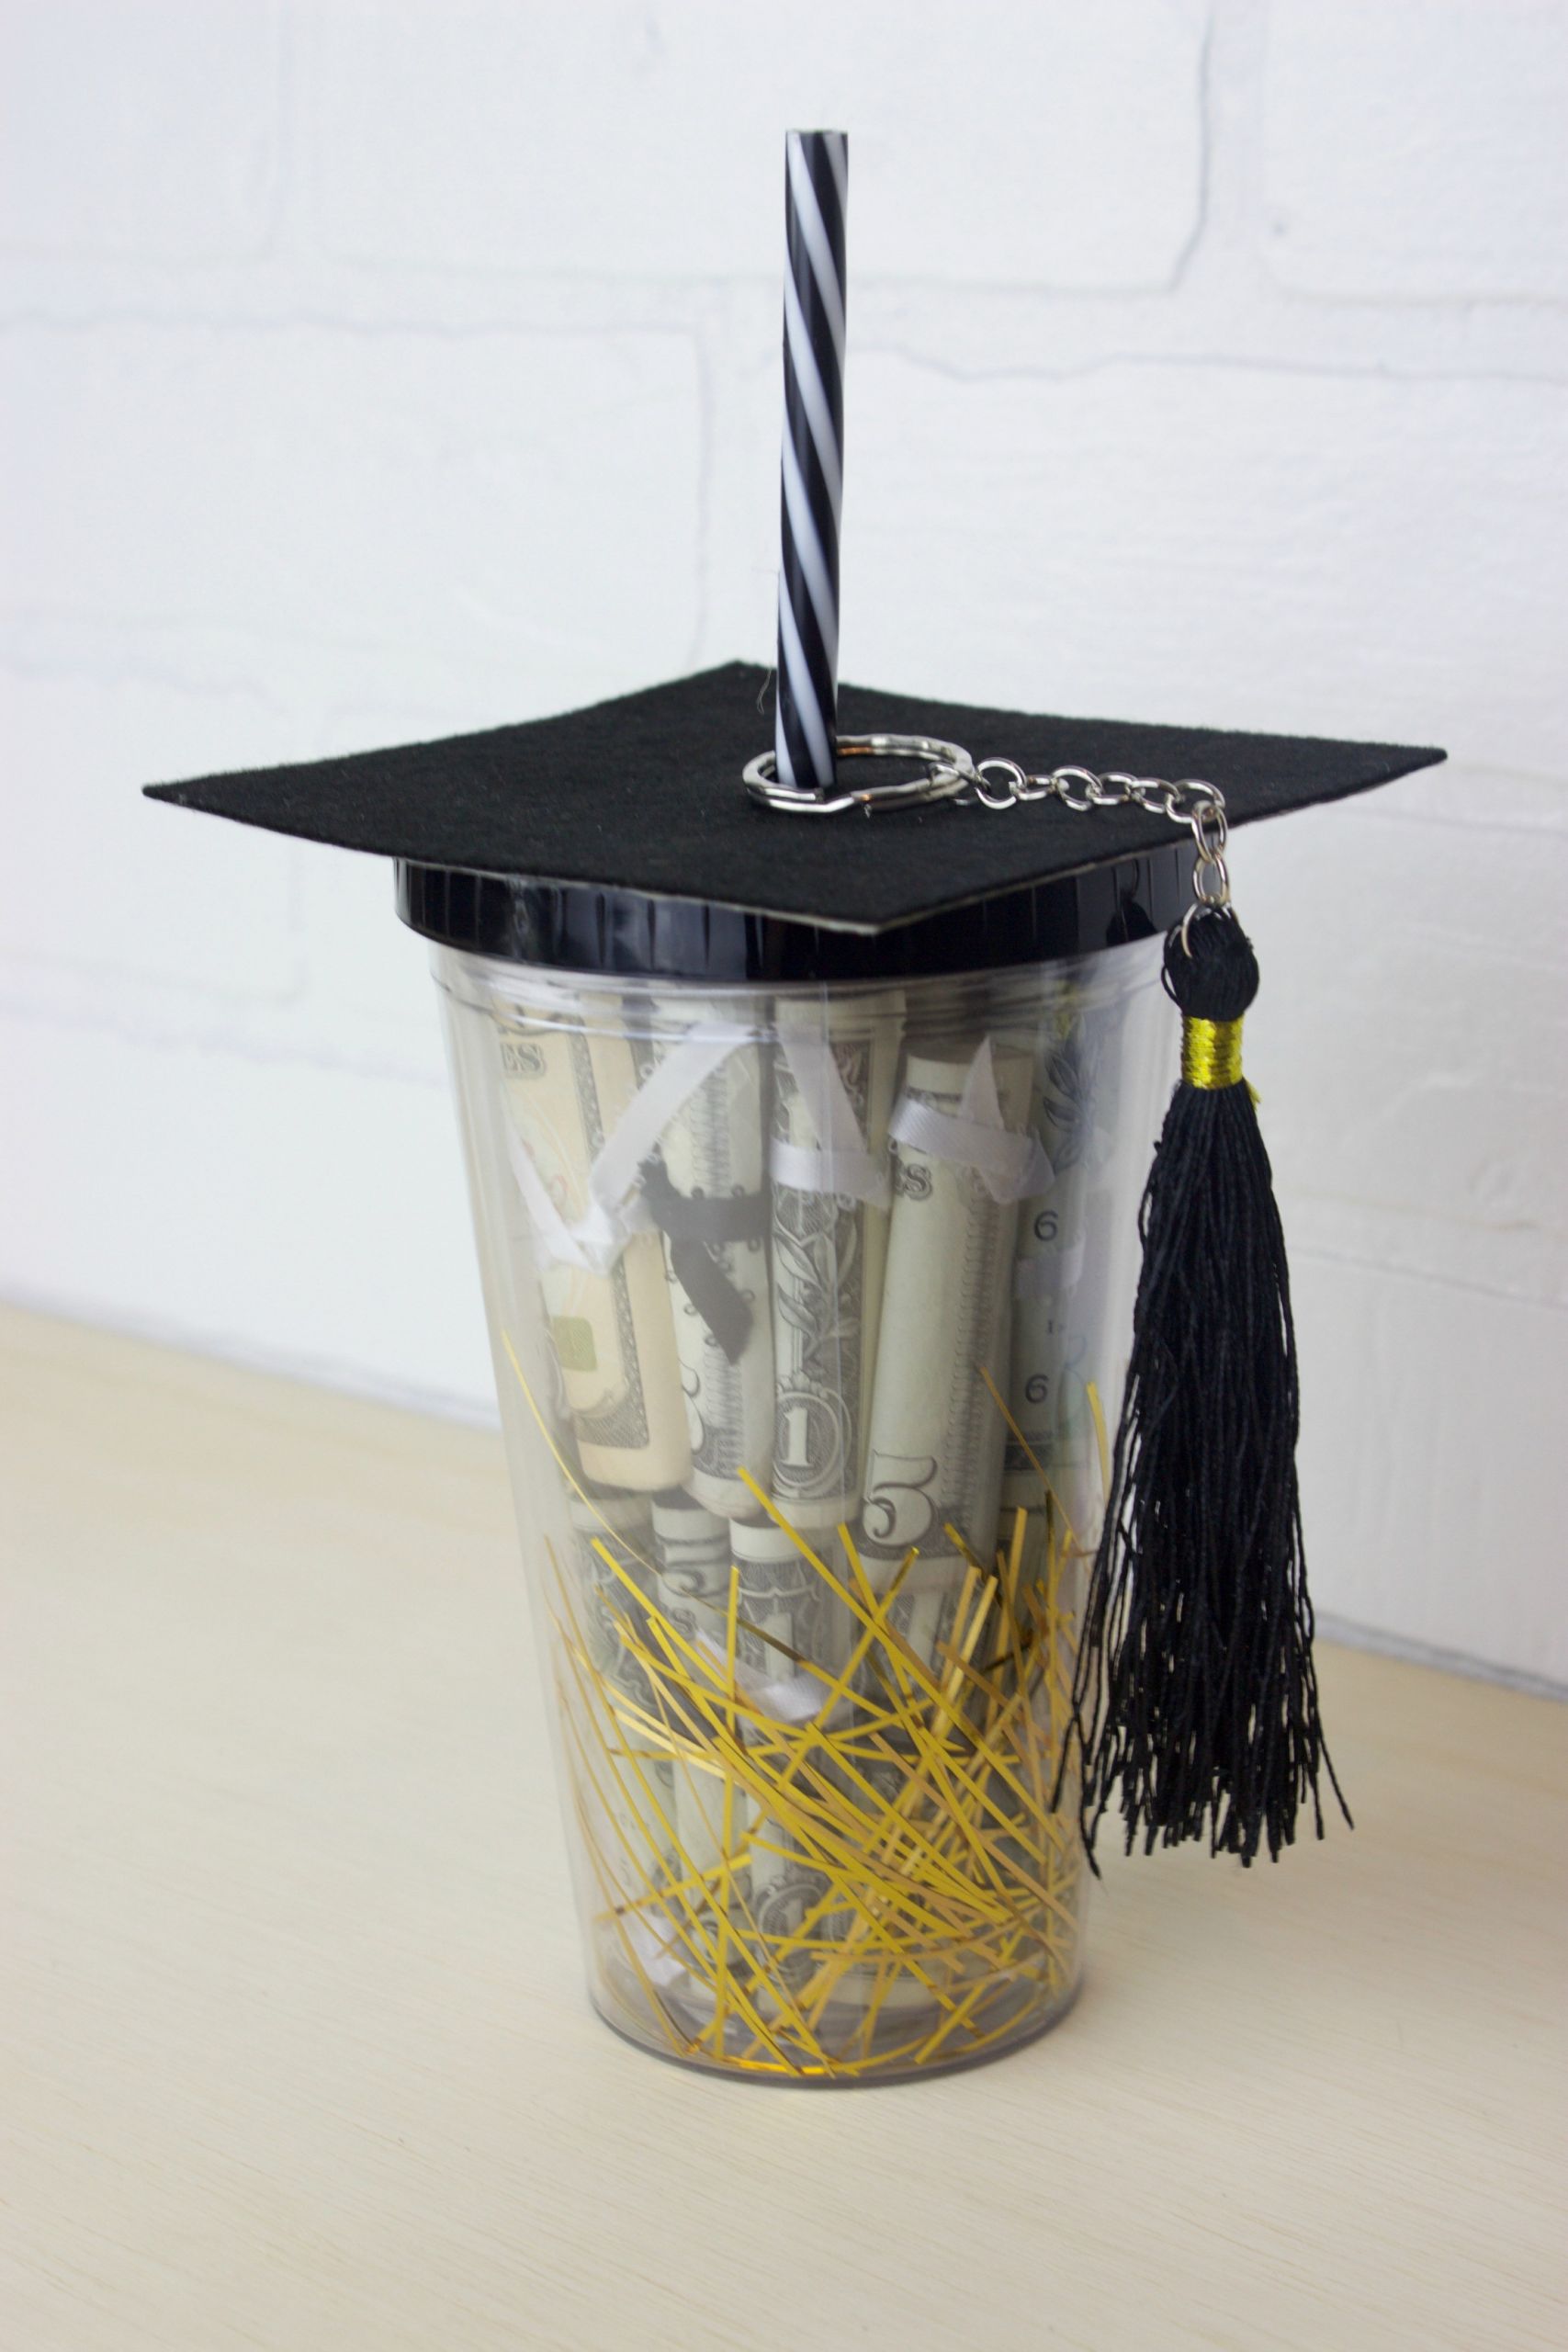 Gift Ideas For Graduation
 DIY Graduation Gift in a Cup